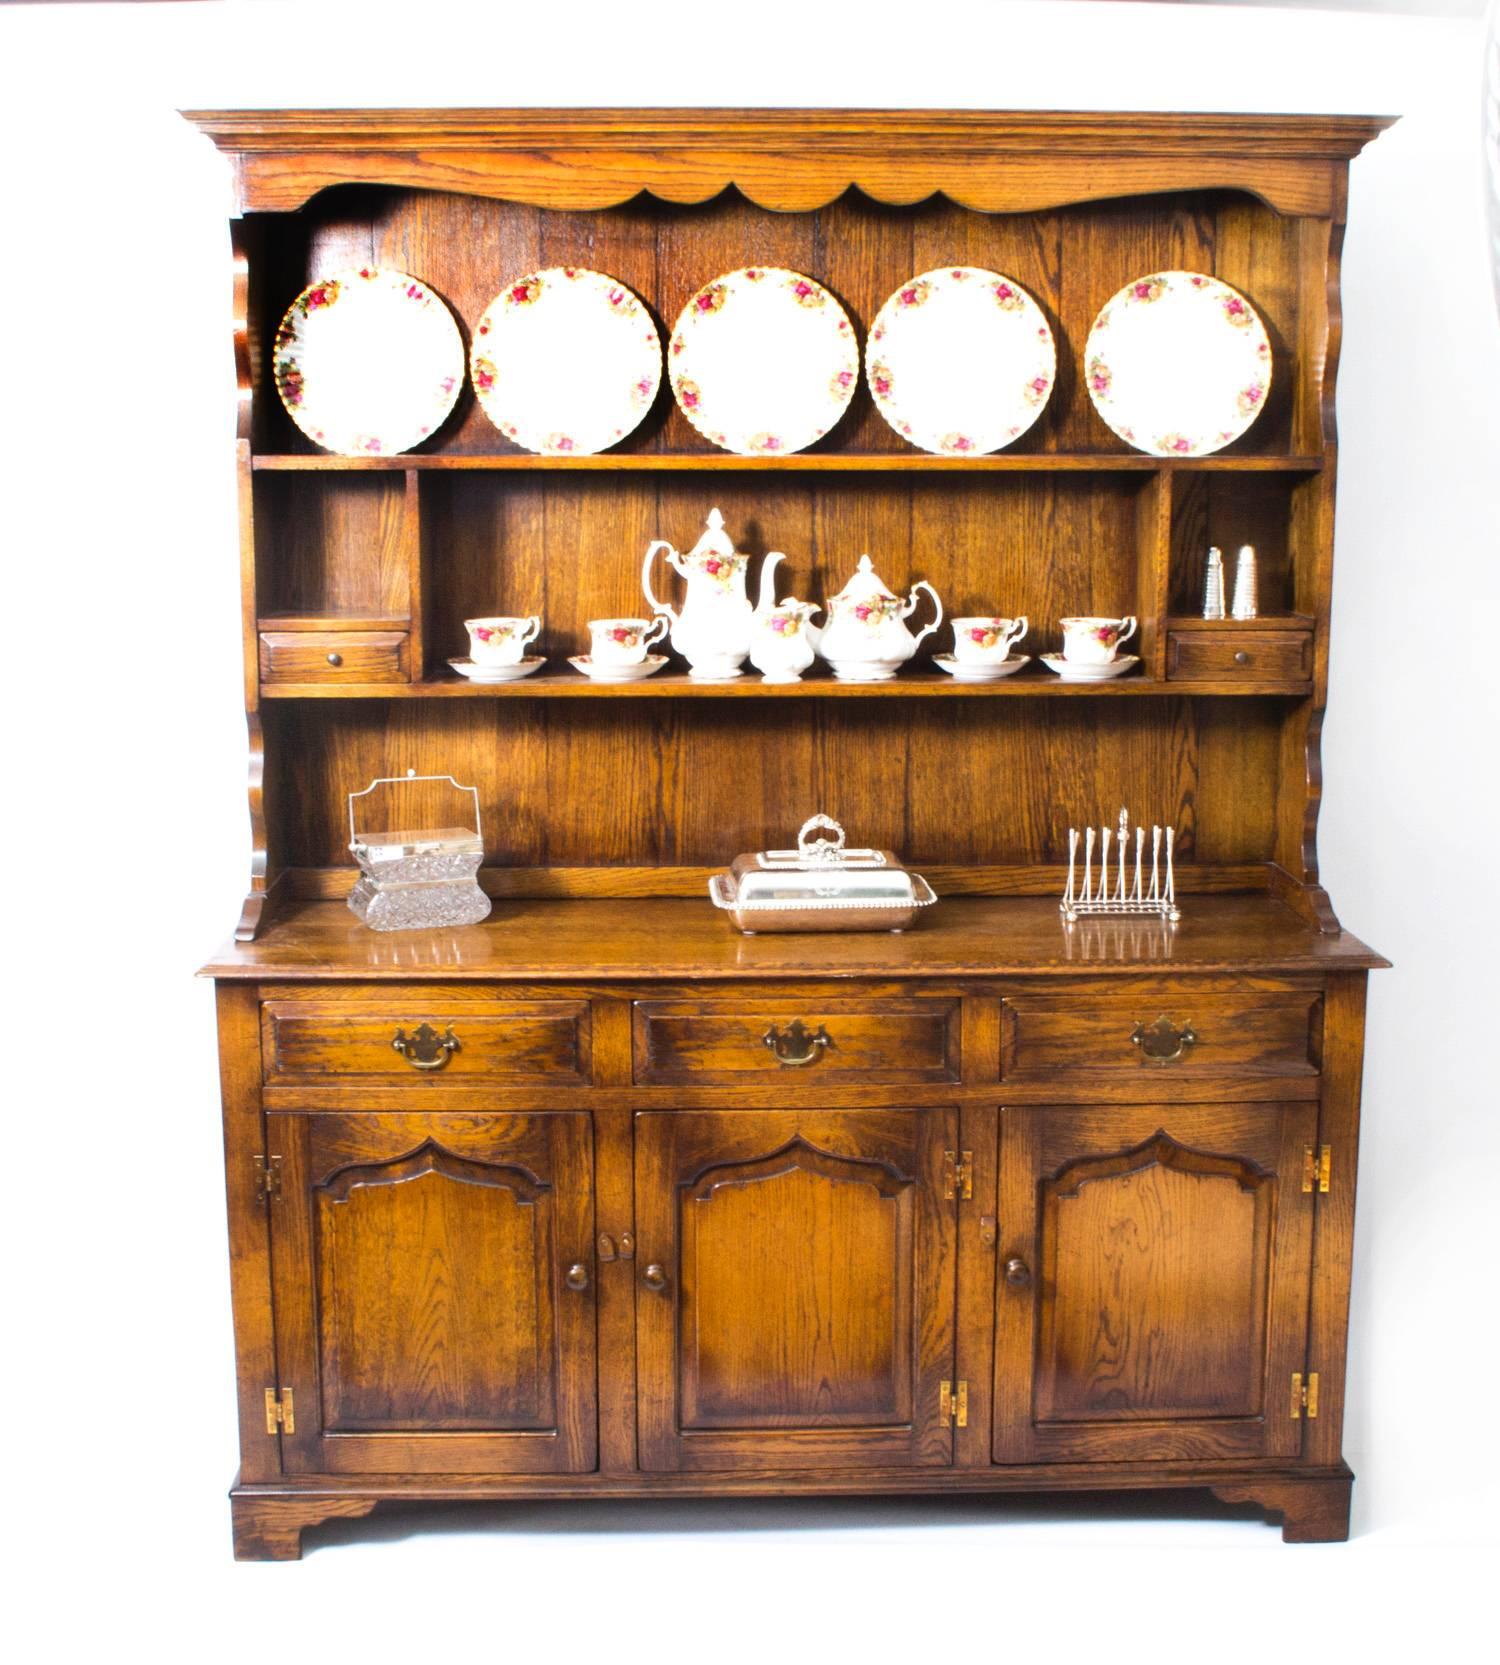 This is a superb vintage Welsh oak dresser which dates from the second half of the 20th century.

The top has an open rack with two shelves and a pair of small drawers. The bottom has three capacious drawers over three cupboards with plenty of